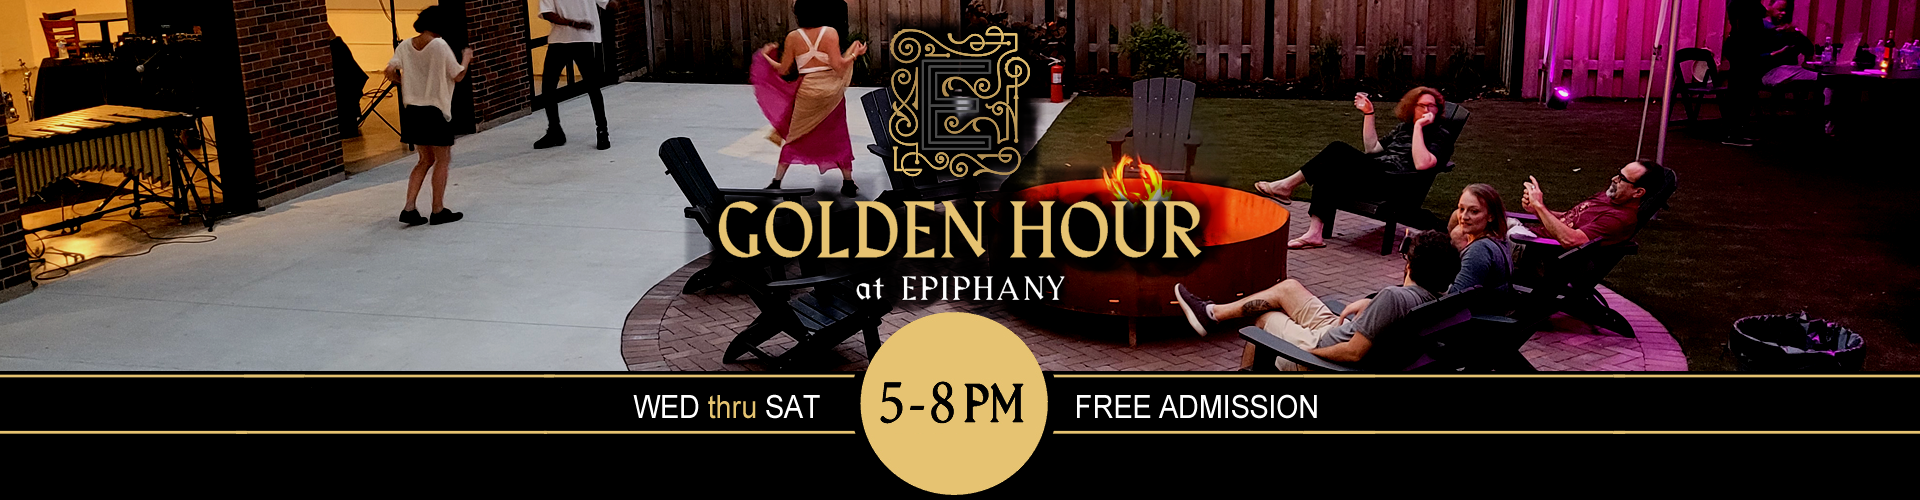 Golden Hour featuring Ryan Moses - Epiphany Center for the Arts